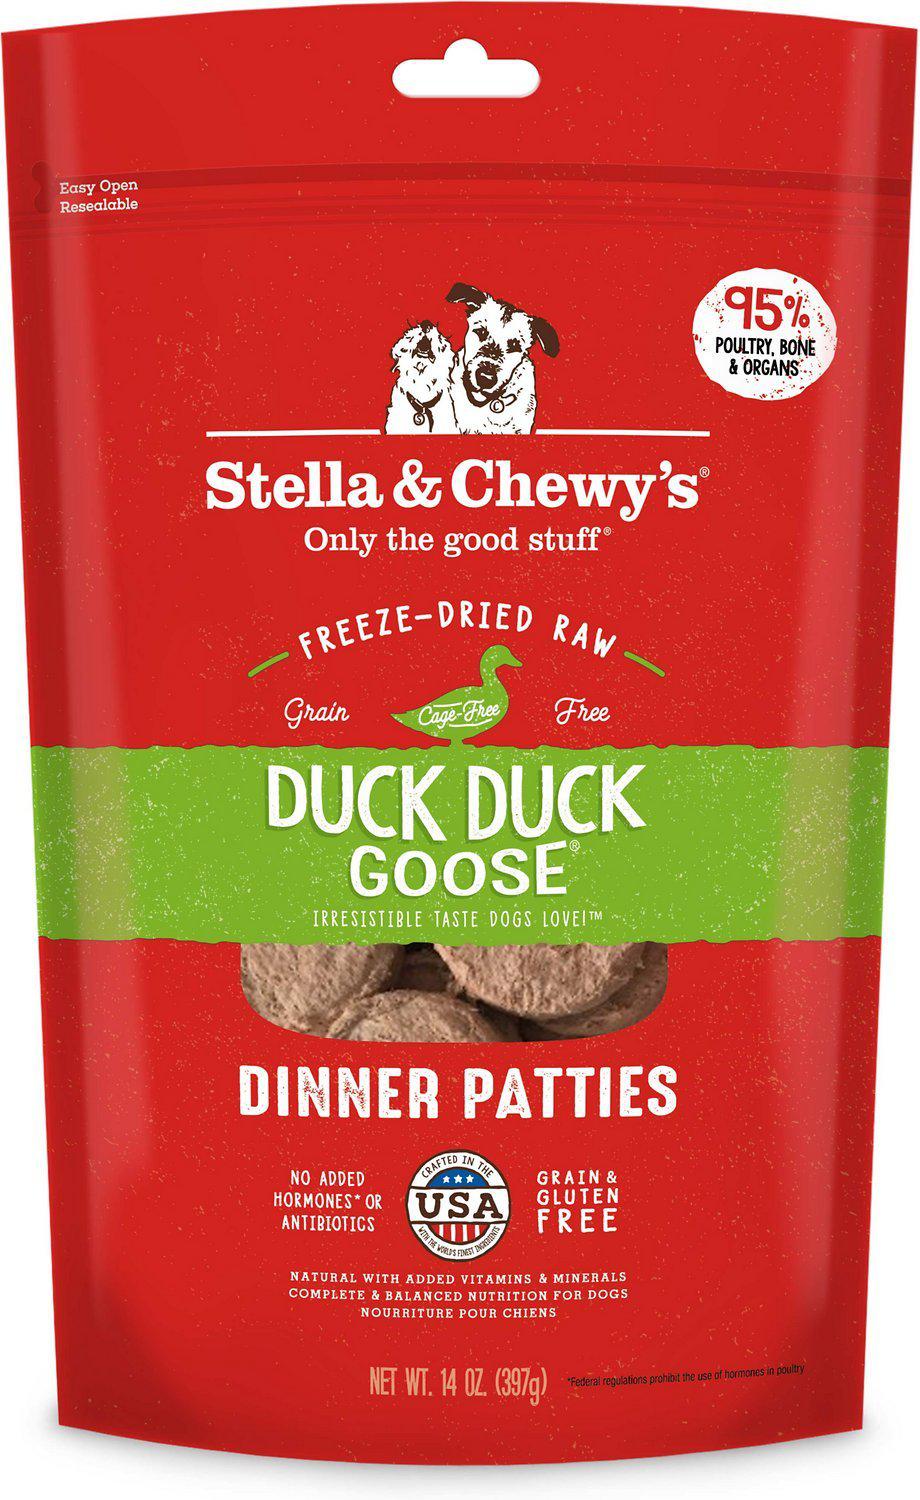 Stella & Chewy's Duck Duck Goose Grain-Free Freeze-Dried Raw Dinner Patties Dog Food-Le Pup Pet Supplies and Grooming